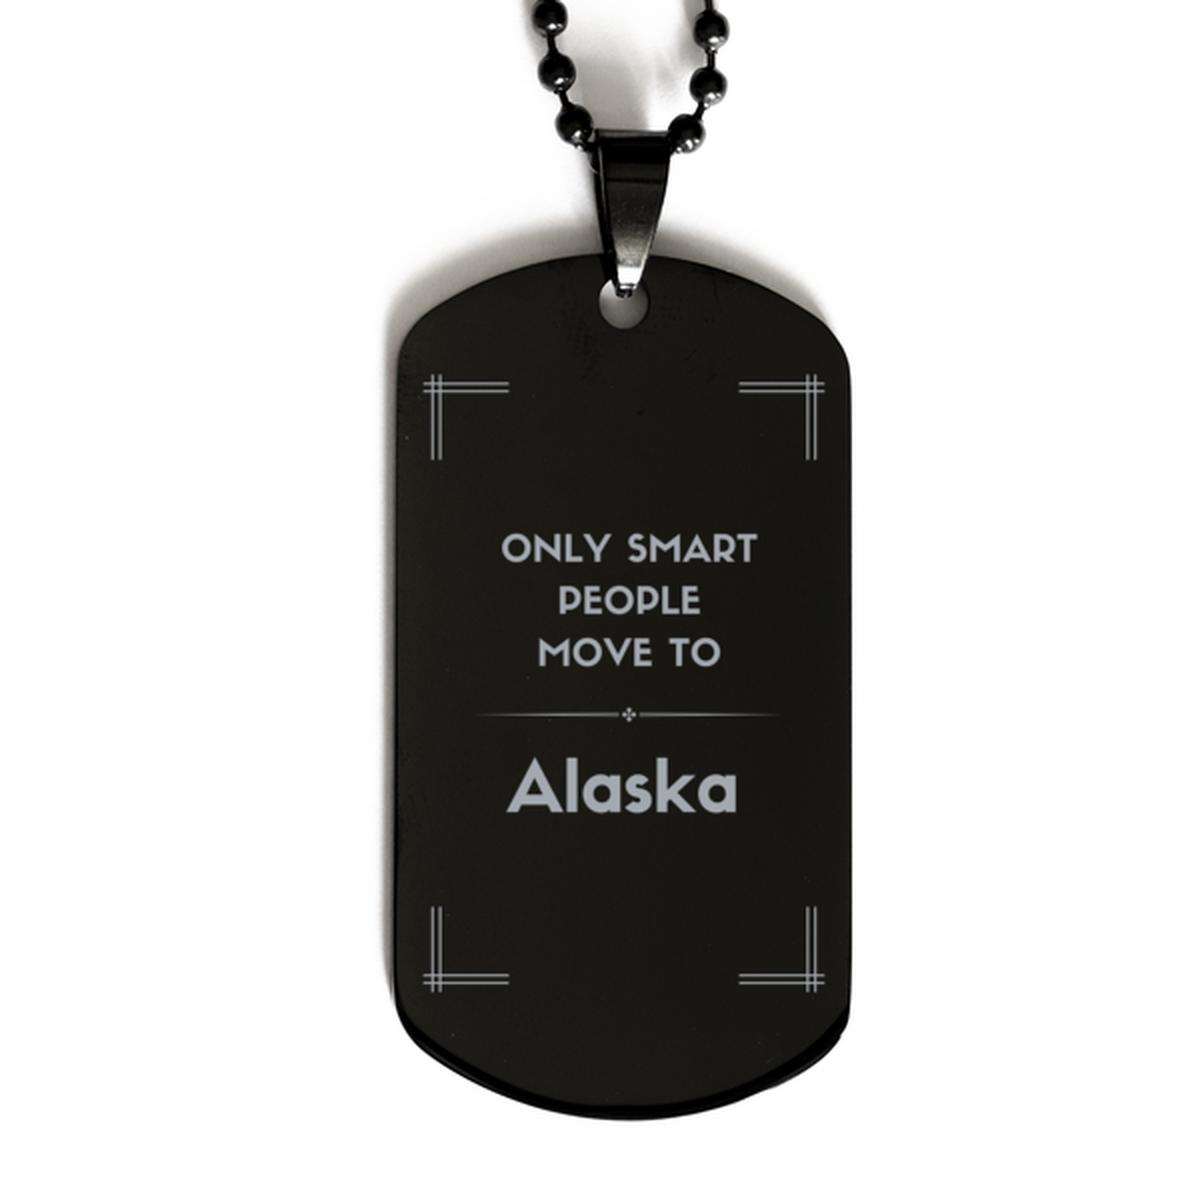 Only smart people move to Alaska Black Dog Tag, Gag Gifts For Alaska, Move to Alaska Gifts for Friends Coworker Funny Saying Quote